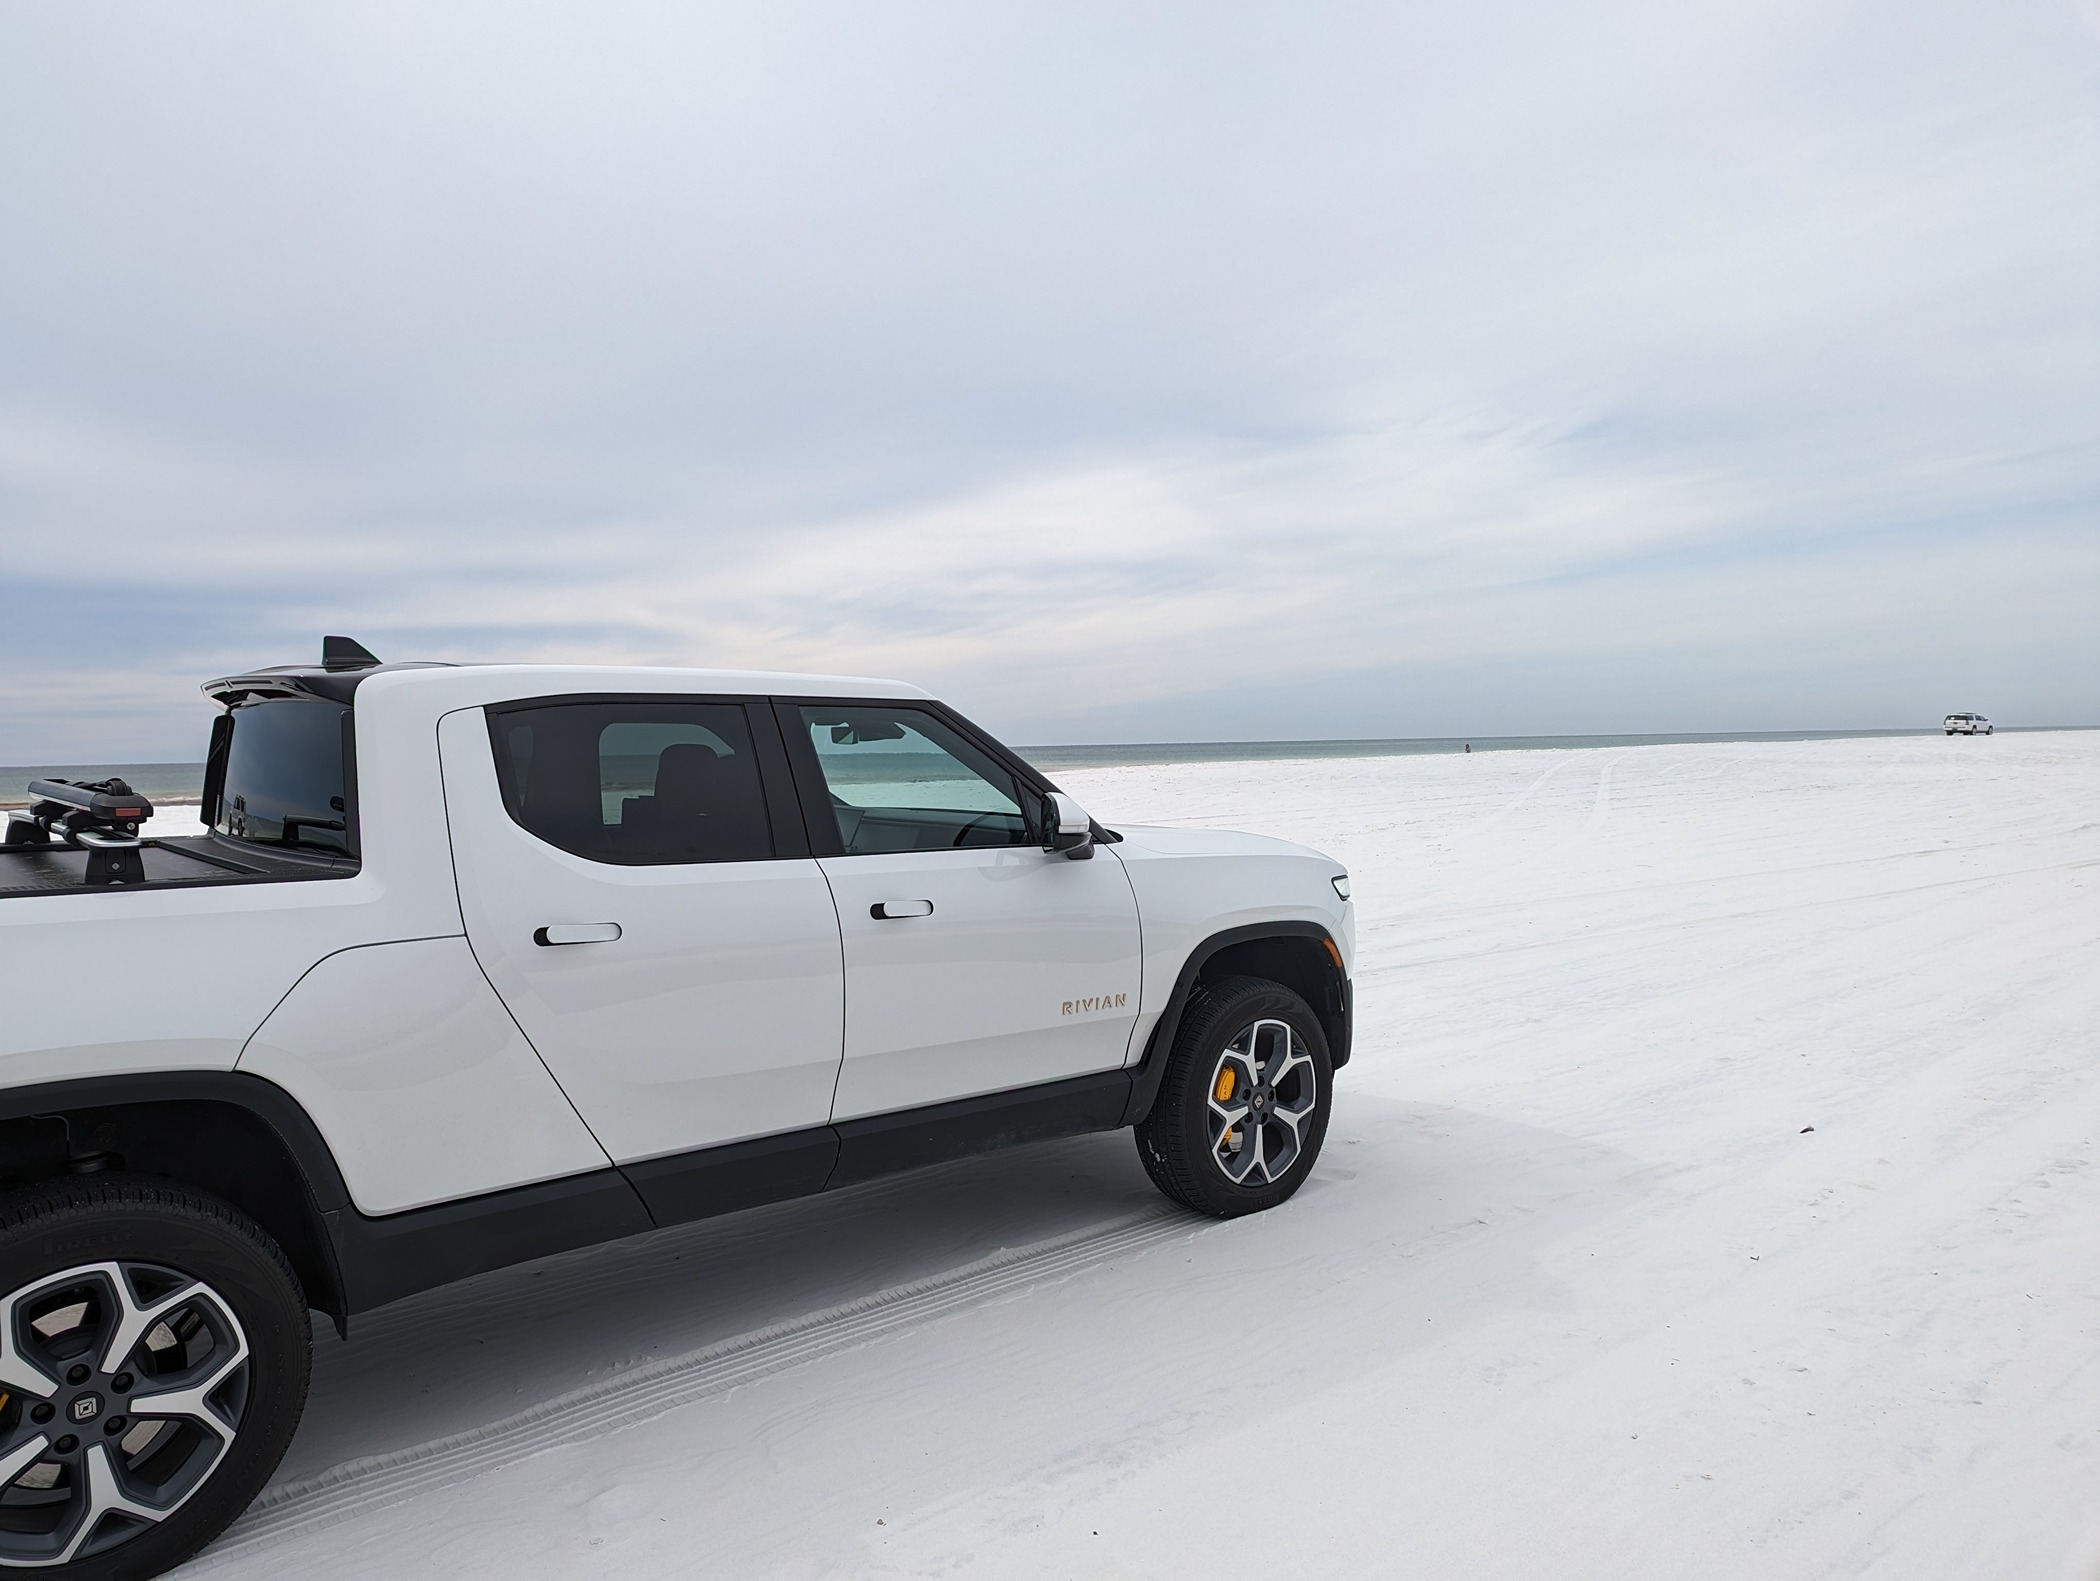 Rivian R1T R1S Random Rivian Photos of the Day - Post Yours! 📸 🤳 PXL_20240218_165723874